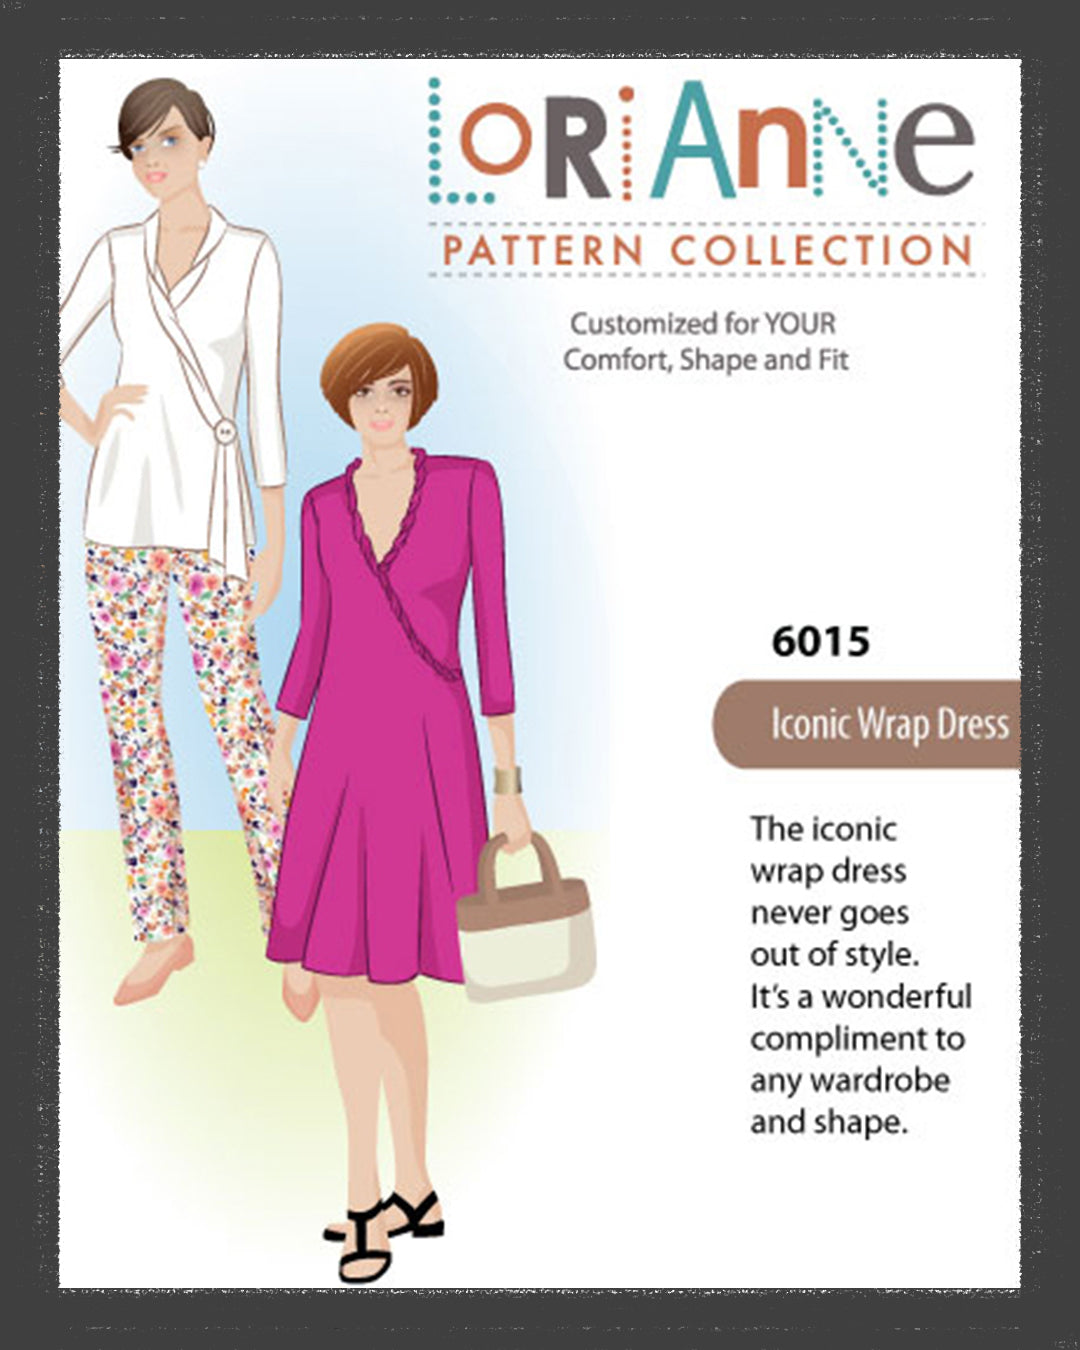 LORIANNE PATTERNS 6015 - ICONIC WRAP DRESS (PRINTED)